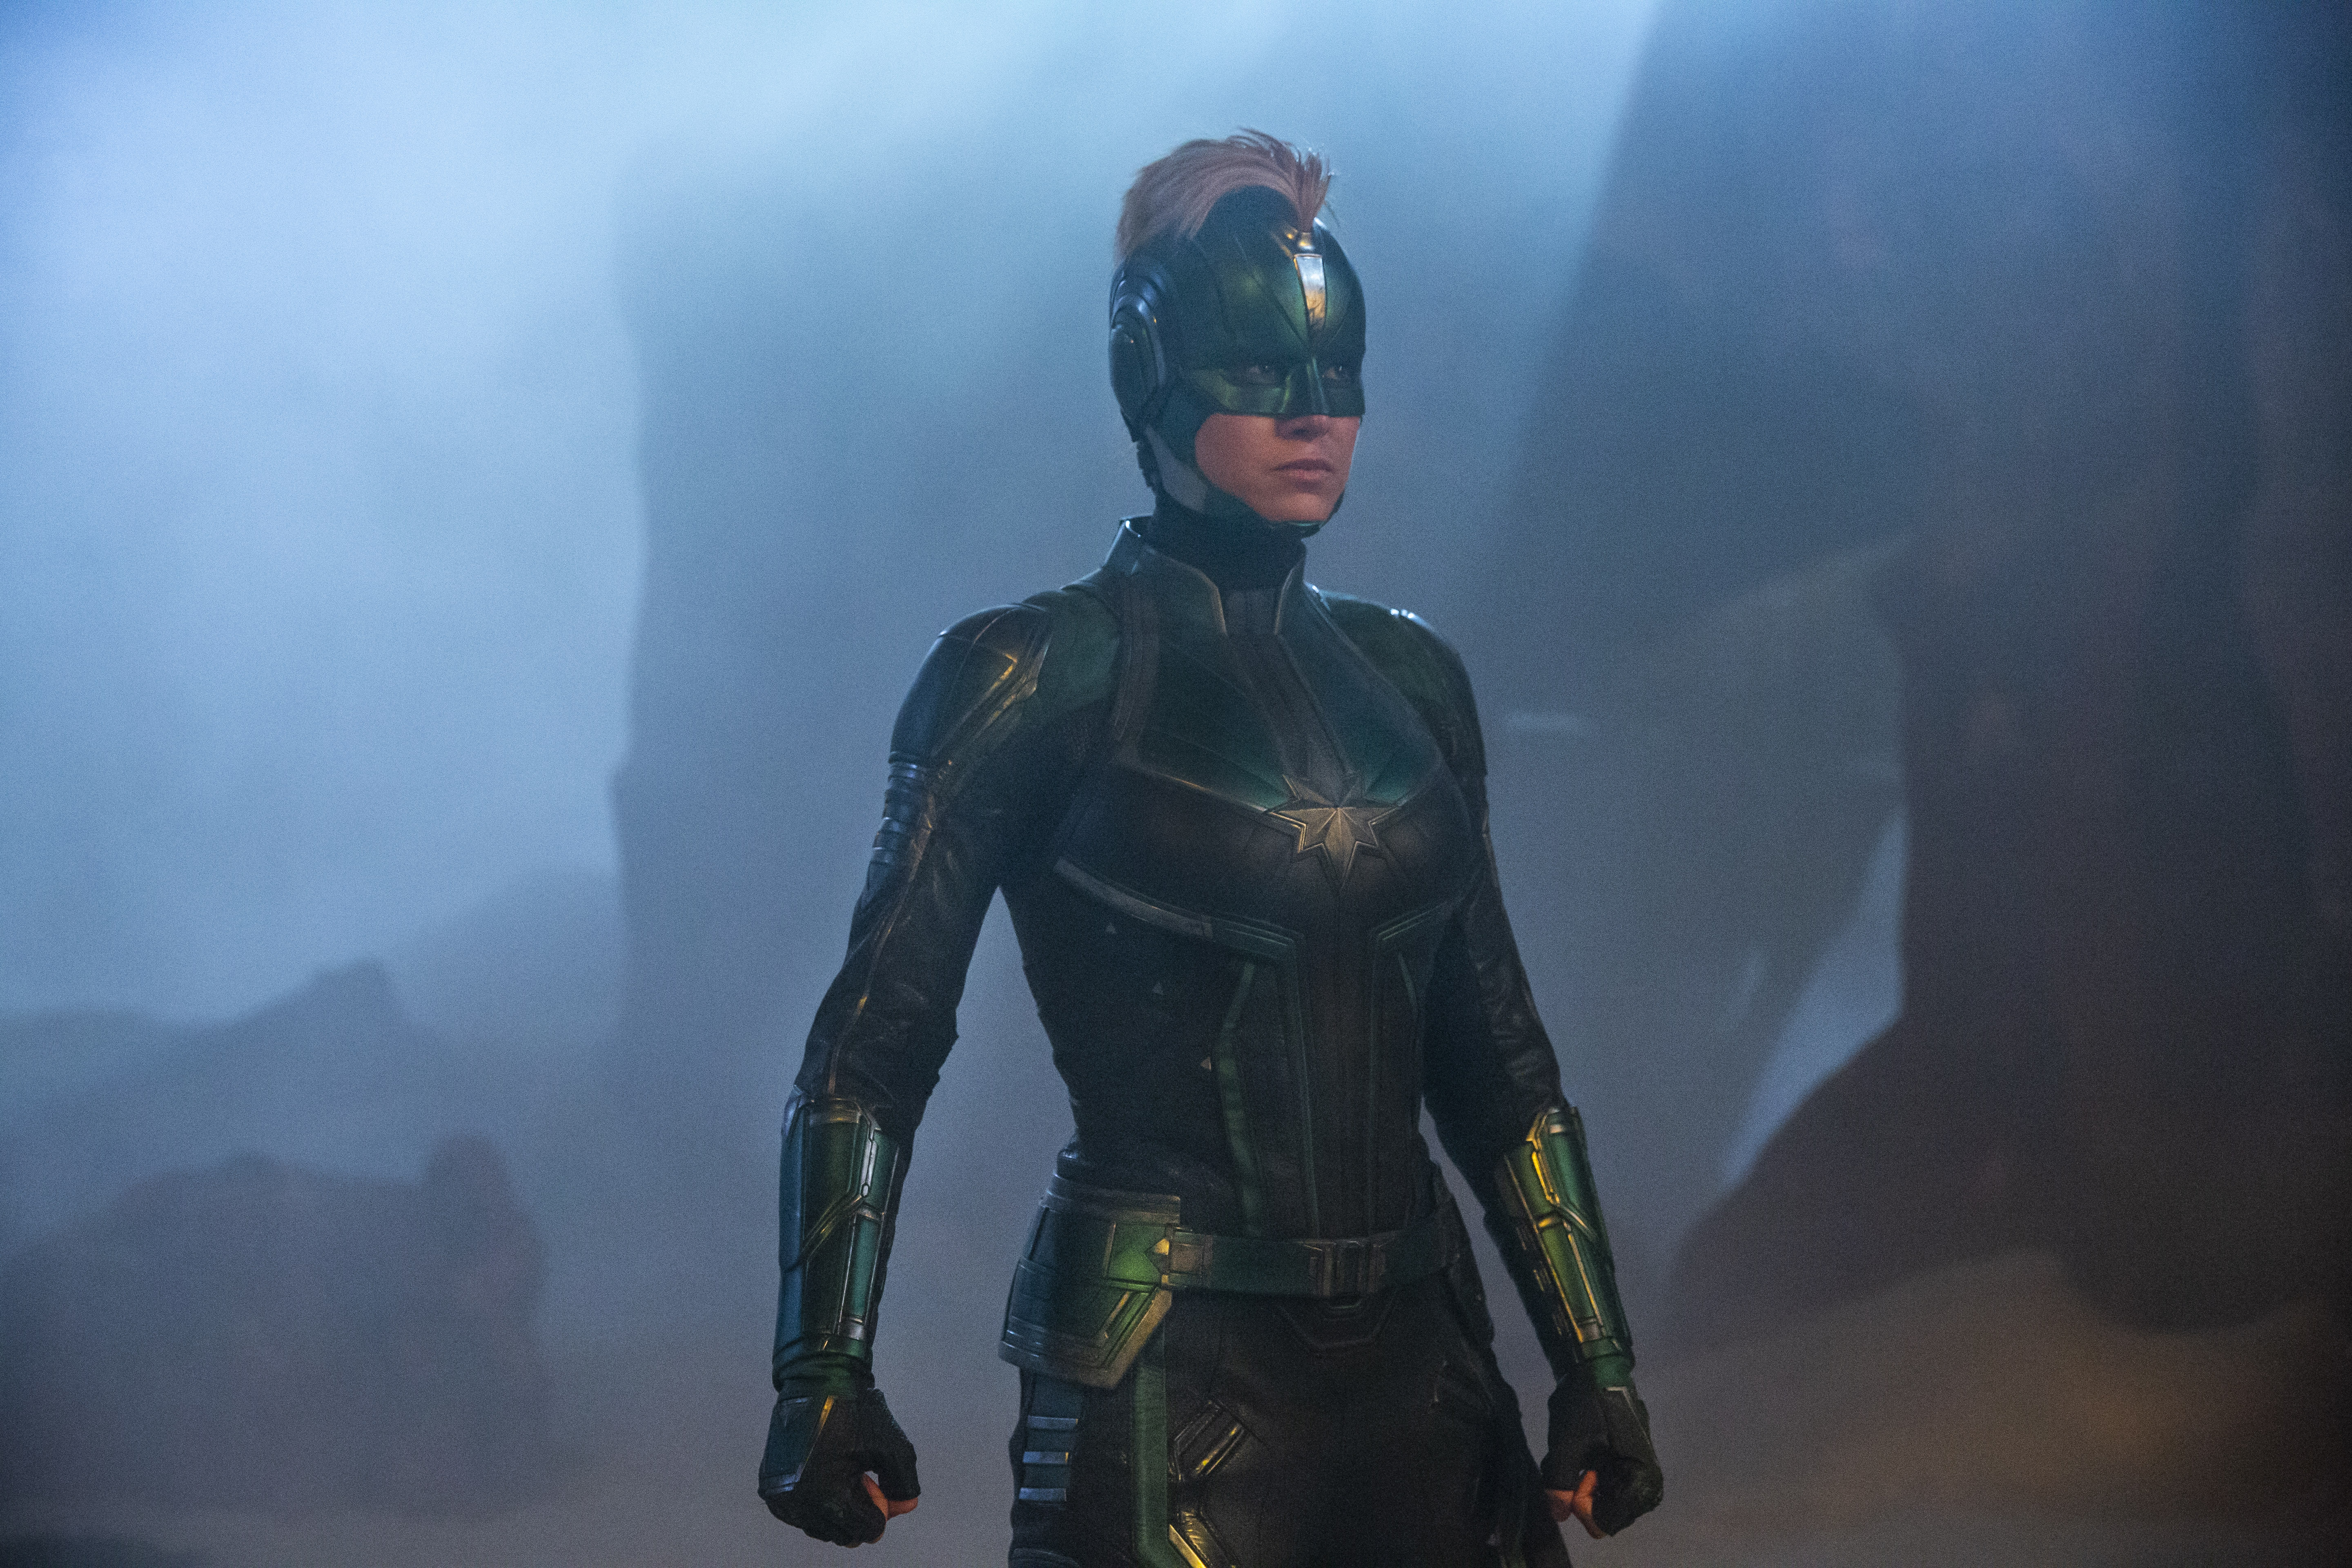 Captain Marvel High Res Pics Cosmic Book News Images, Photos, Reviews